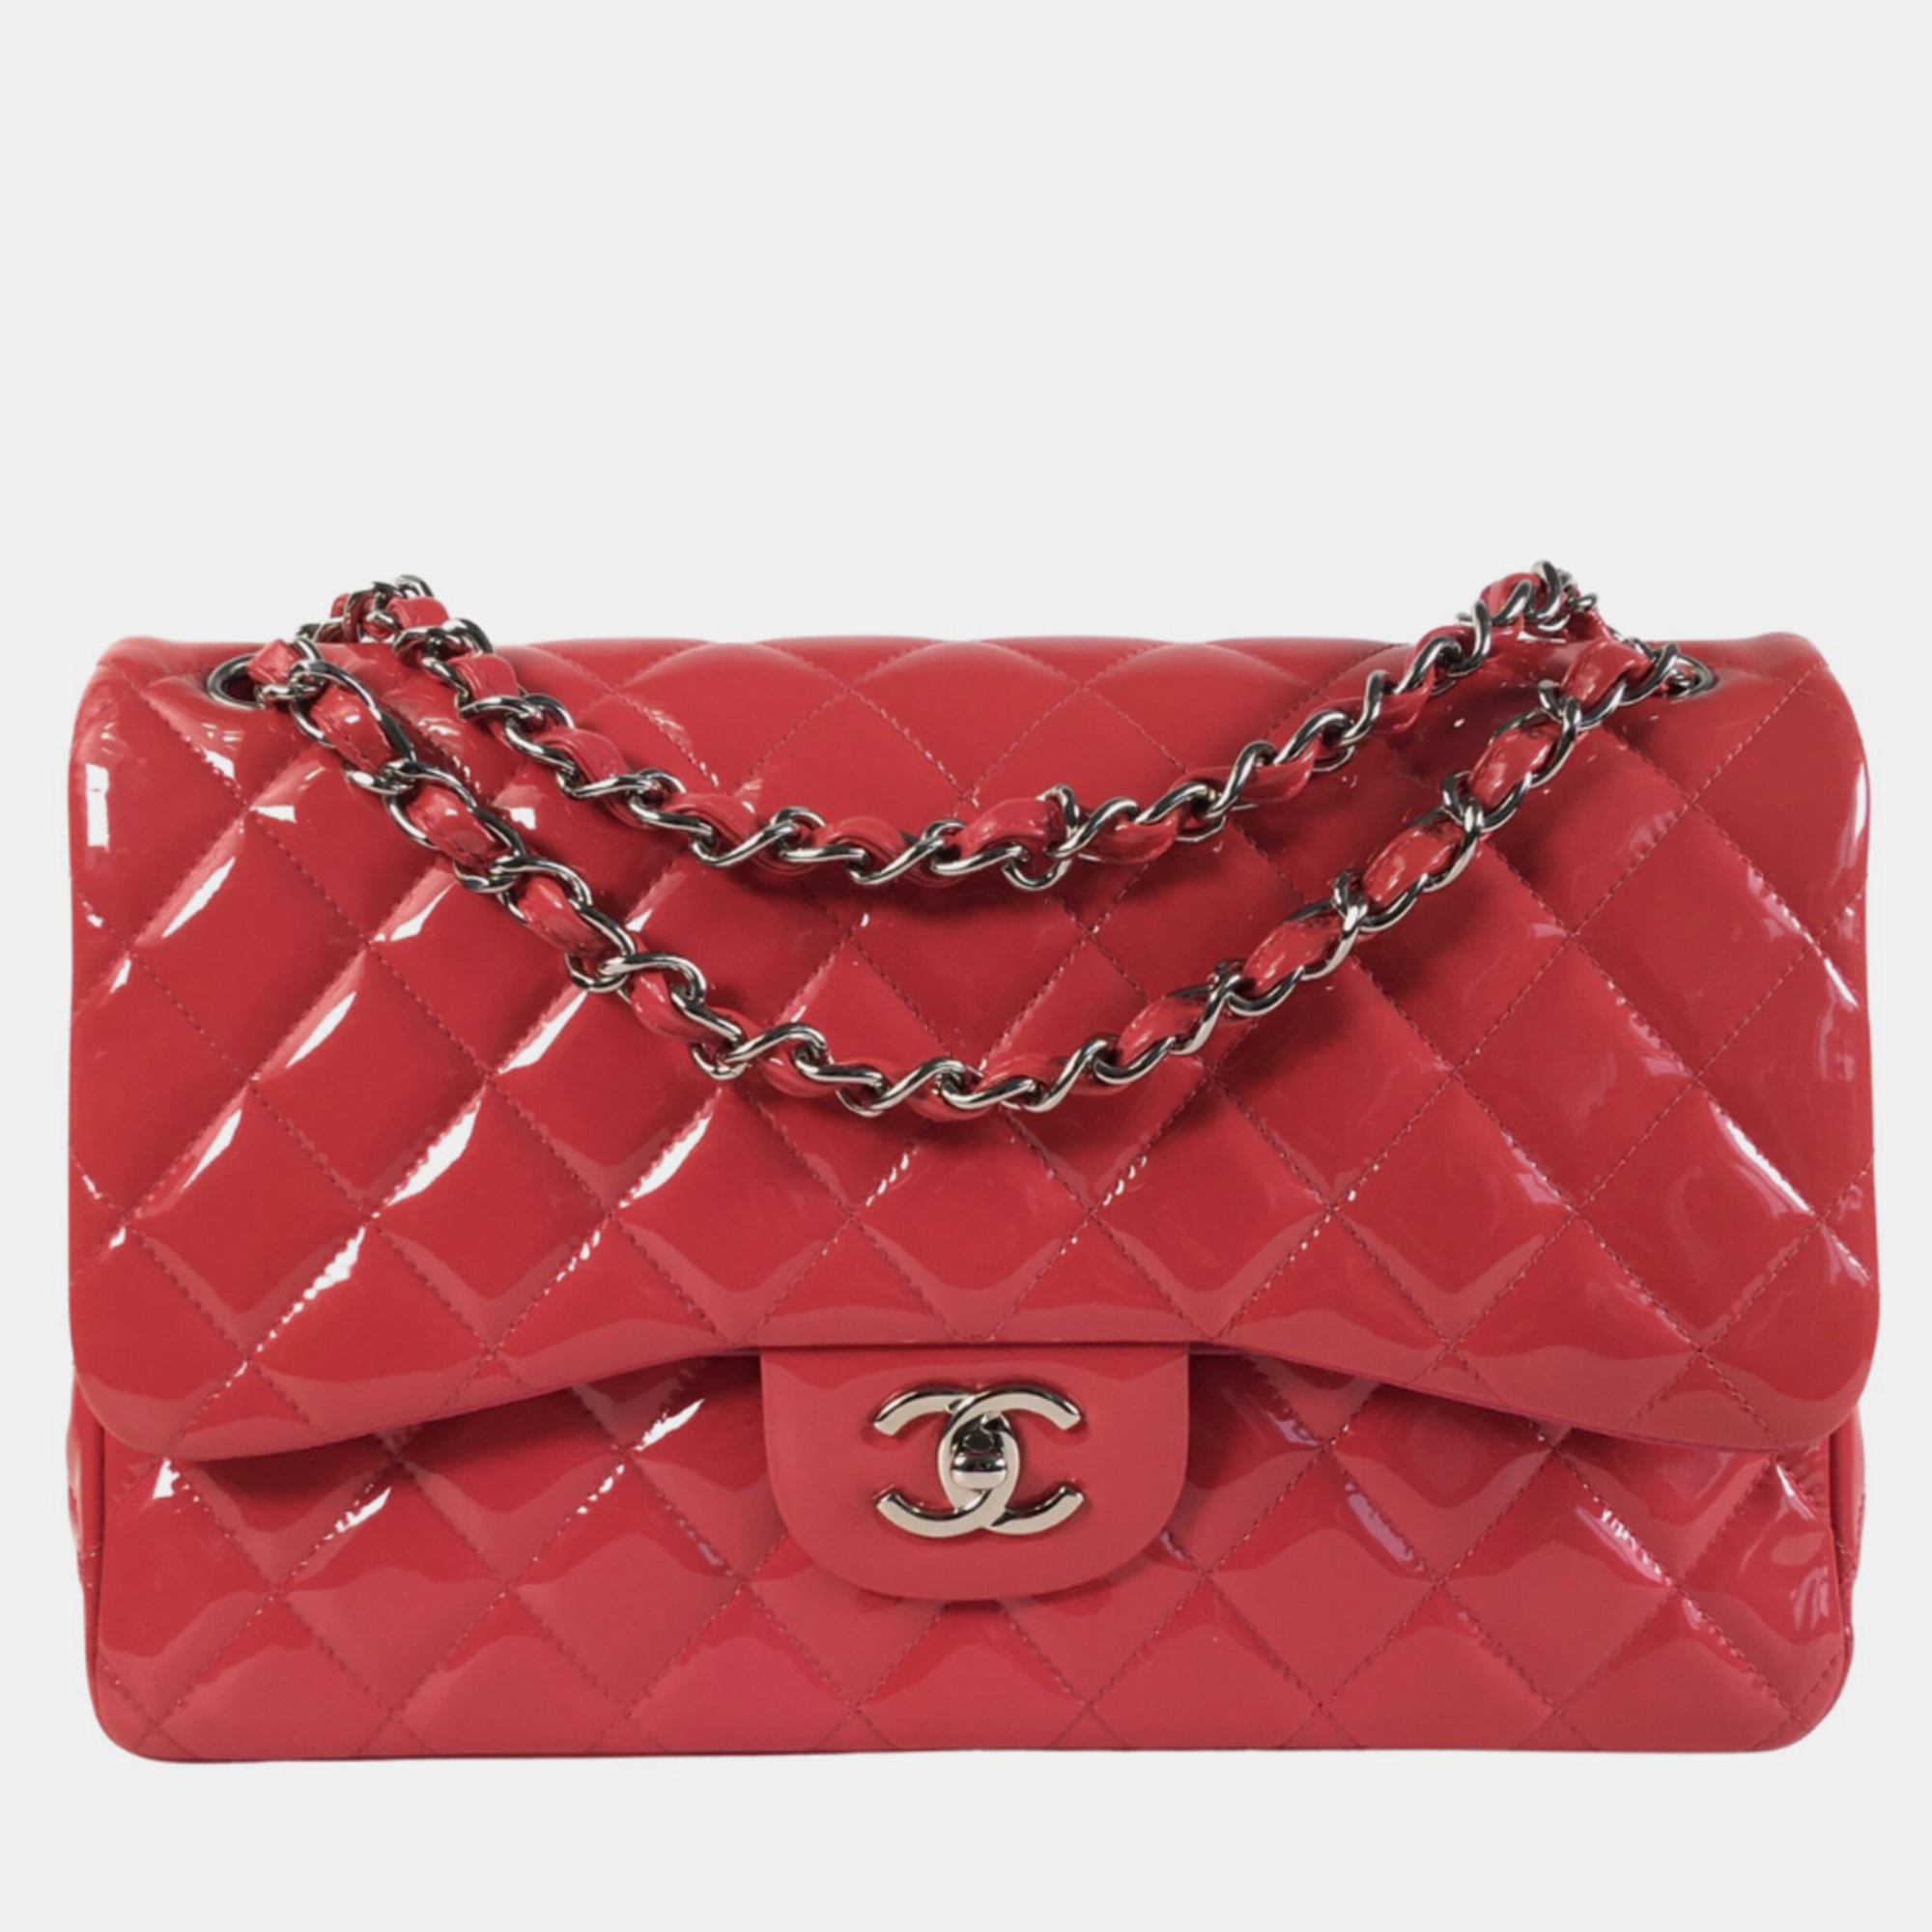 Chanel red patent leather jumbo classic double flap shoulder bag